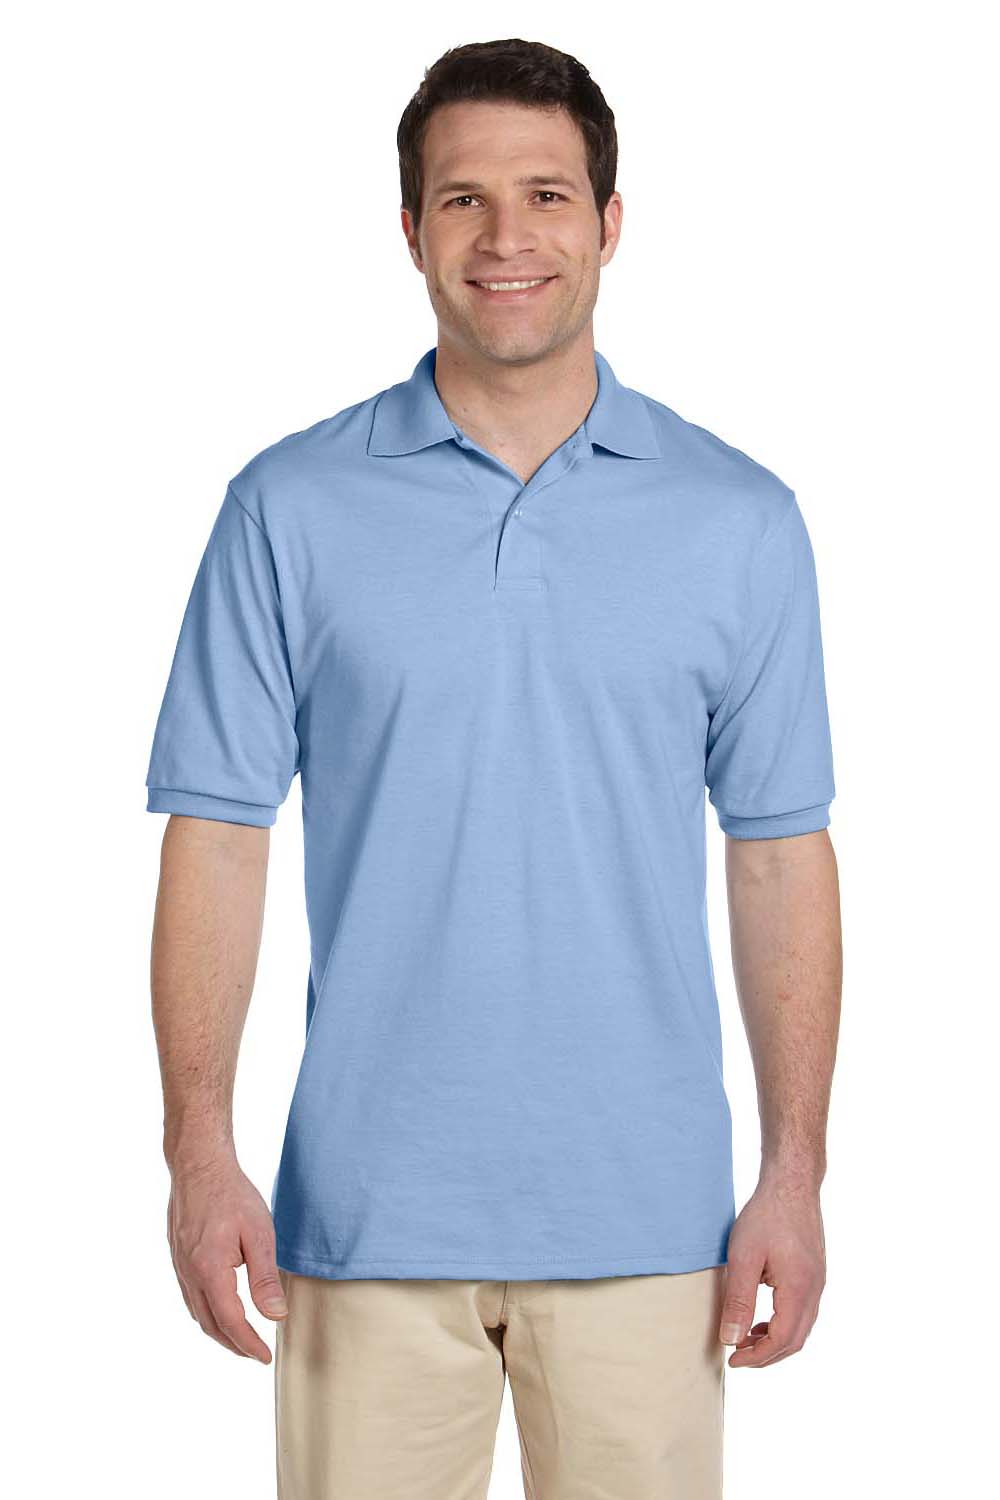 Jerzees 437 Mens SpotShield Stain Resistant Short Sleeve Polo Shirt Light Blue Front